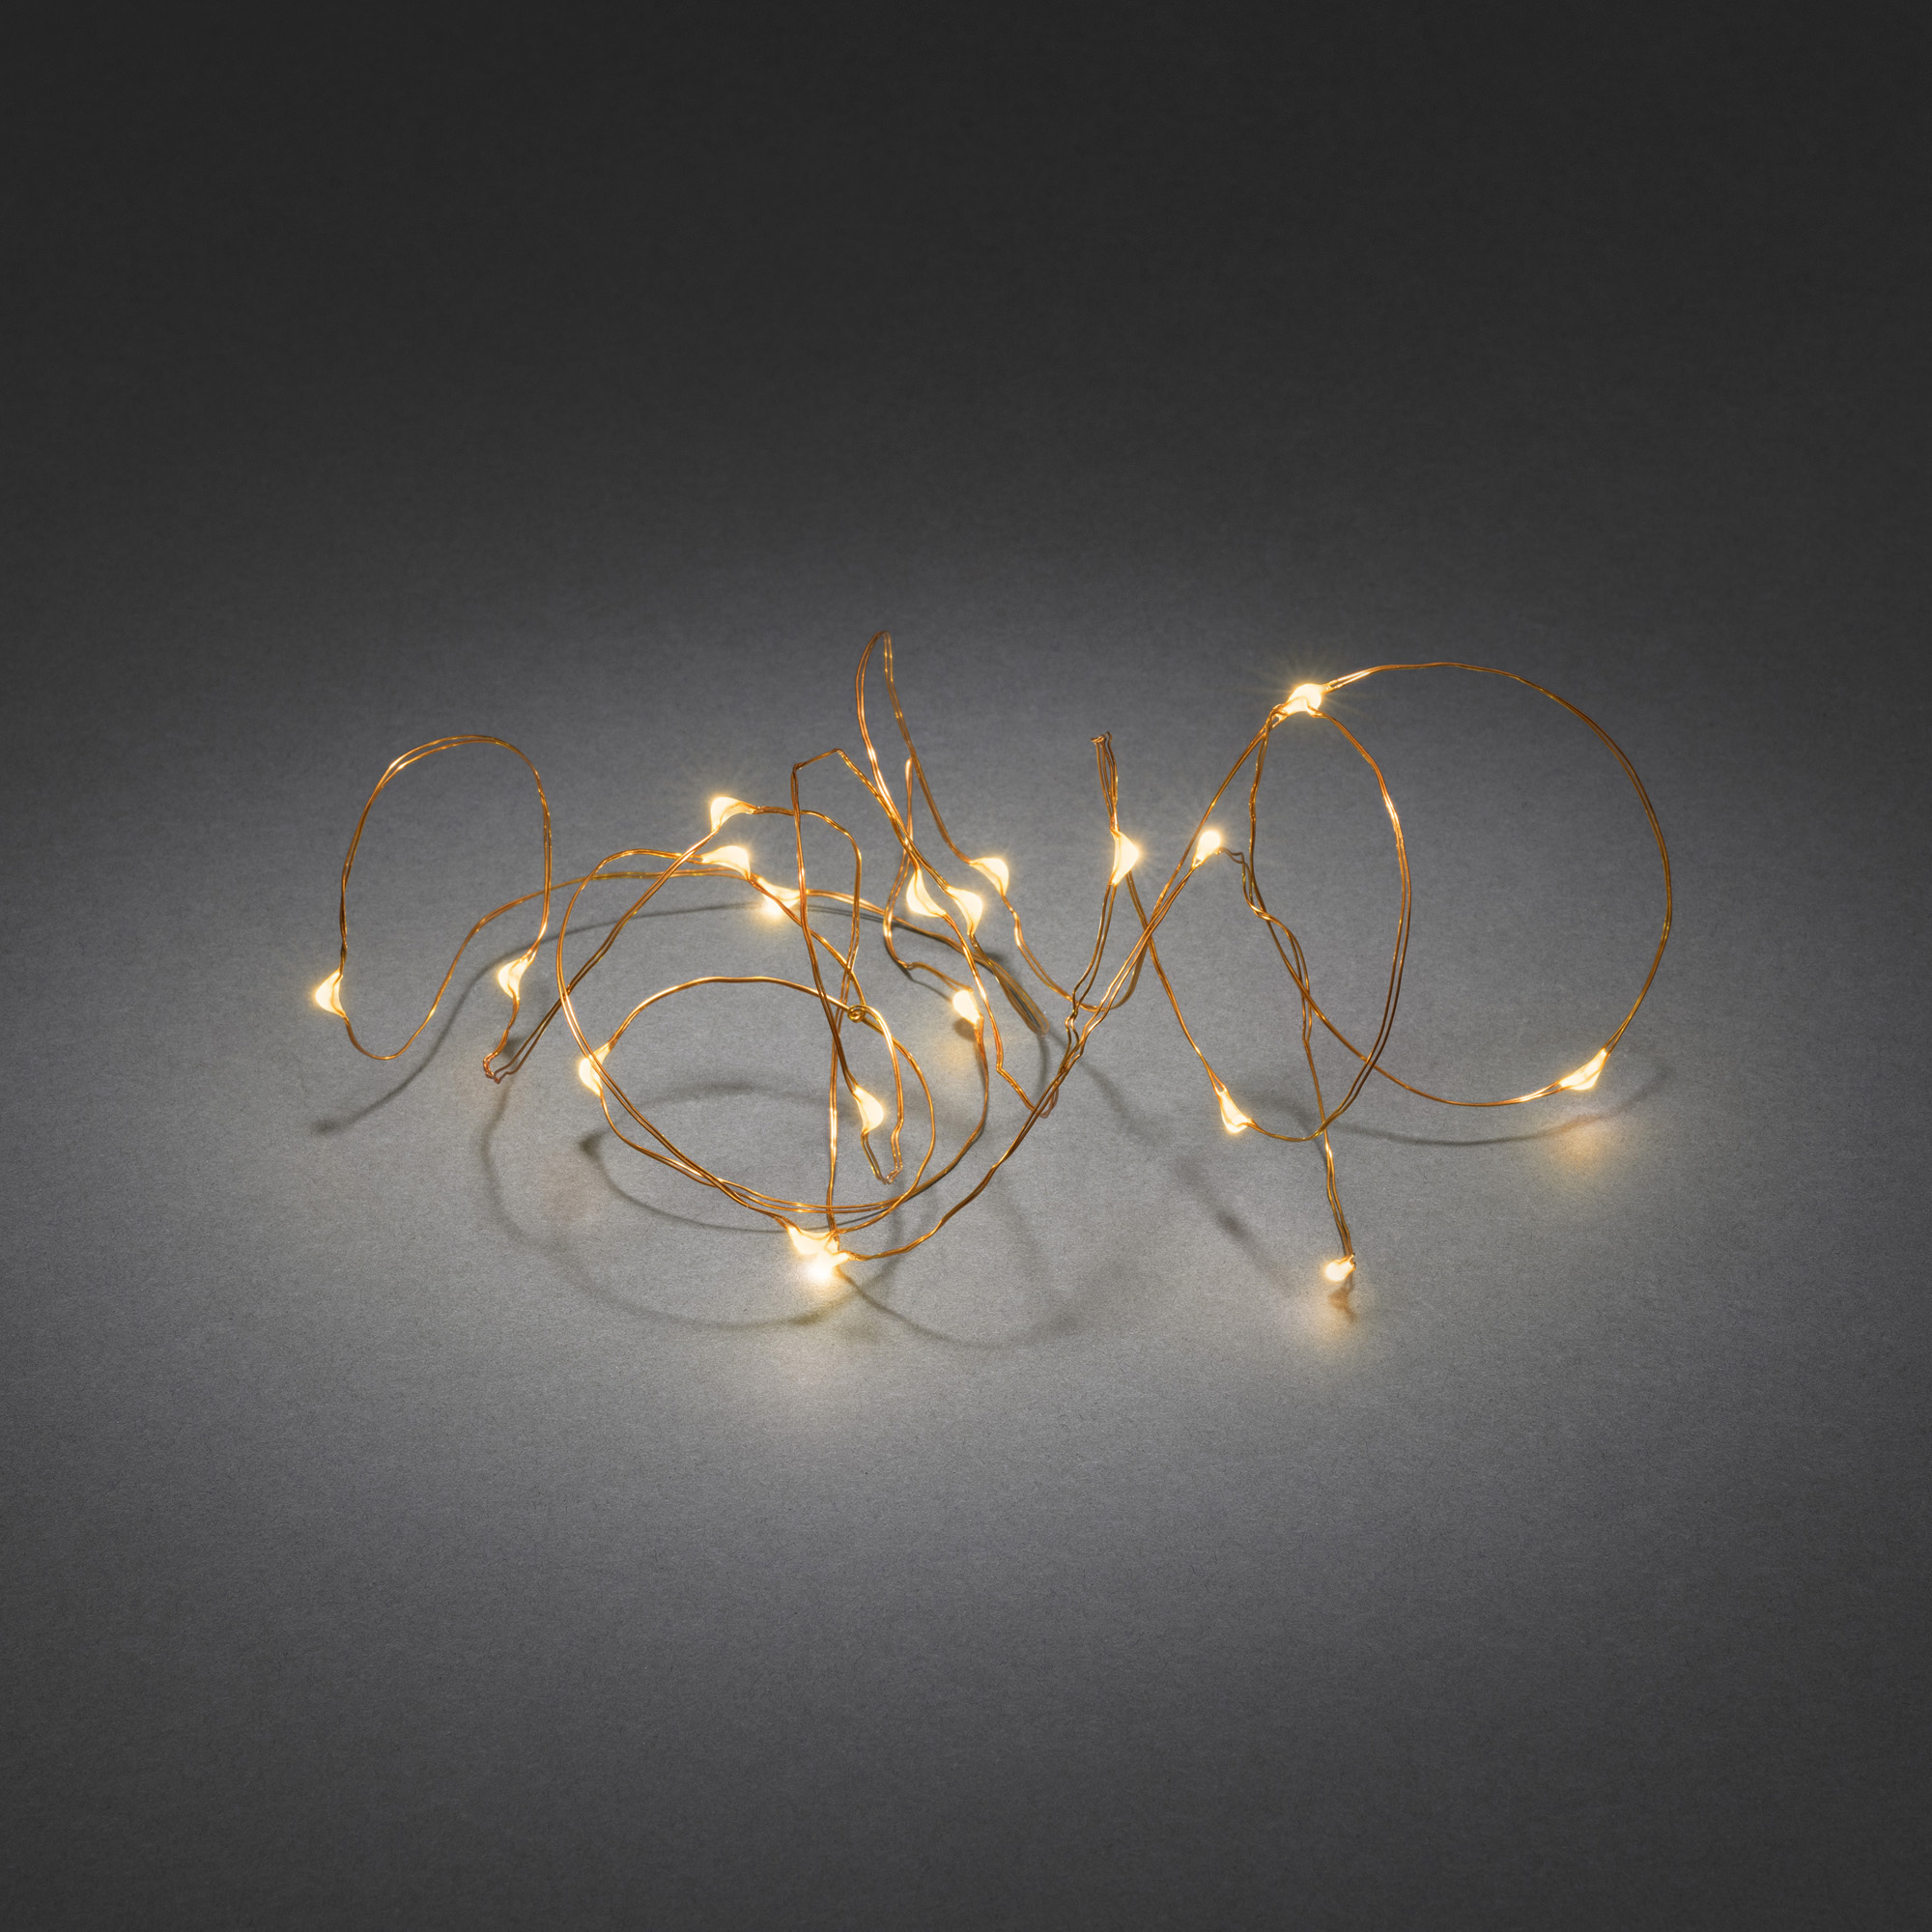 LED Micro Light Chain amber, 4.4m (40 LEDs), 6h timer, Battery Operated, copper